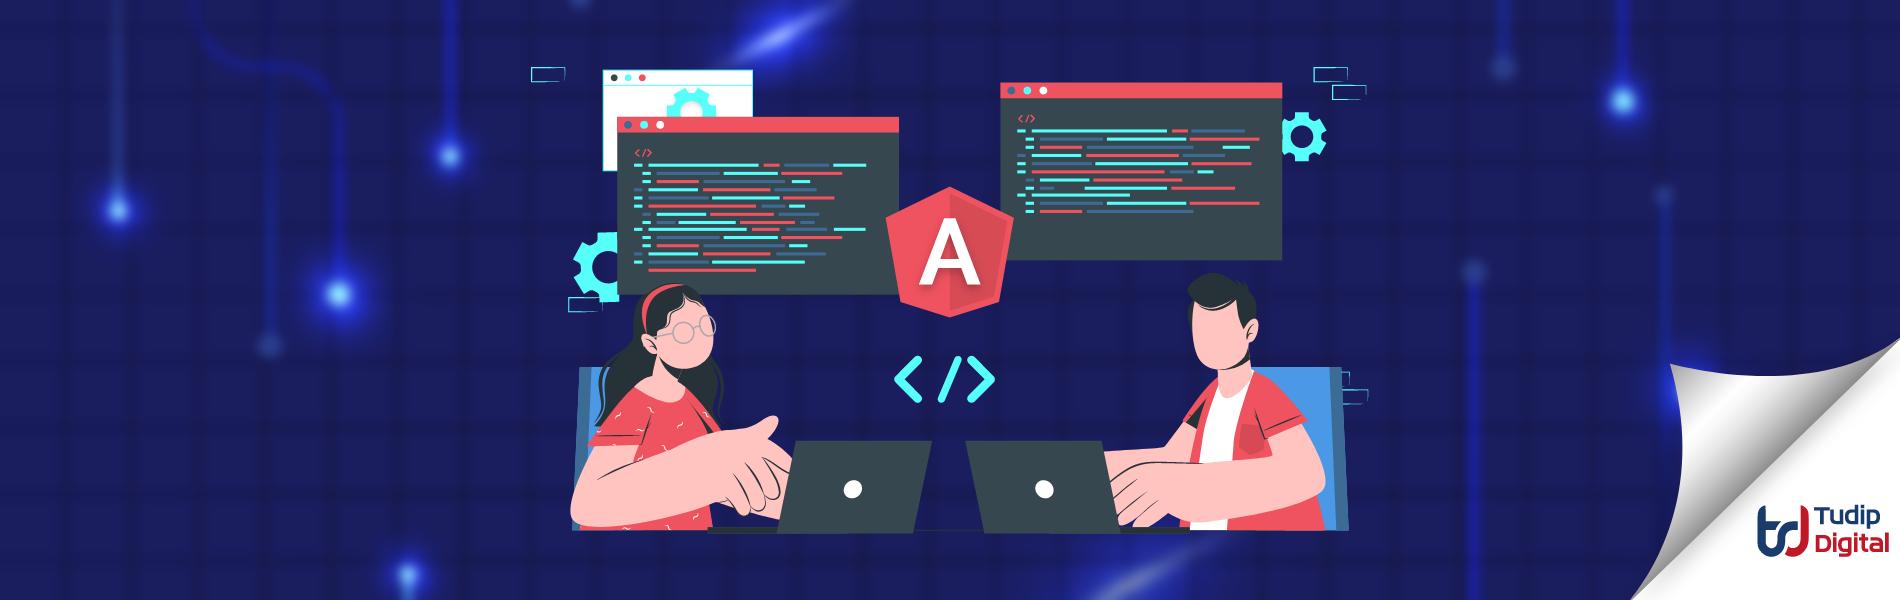 Why We Should Use AngularJS for Web App Development